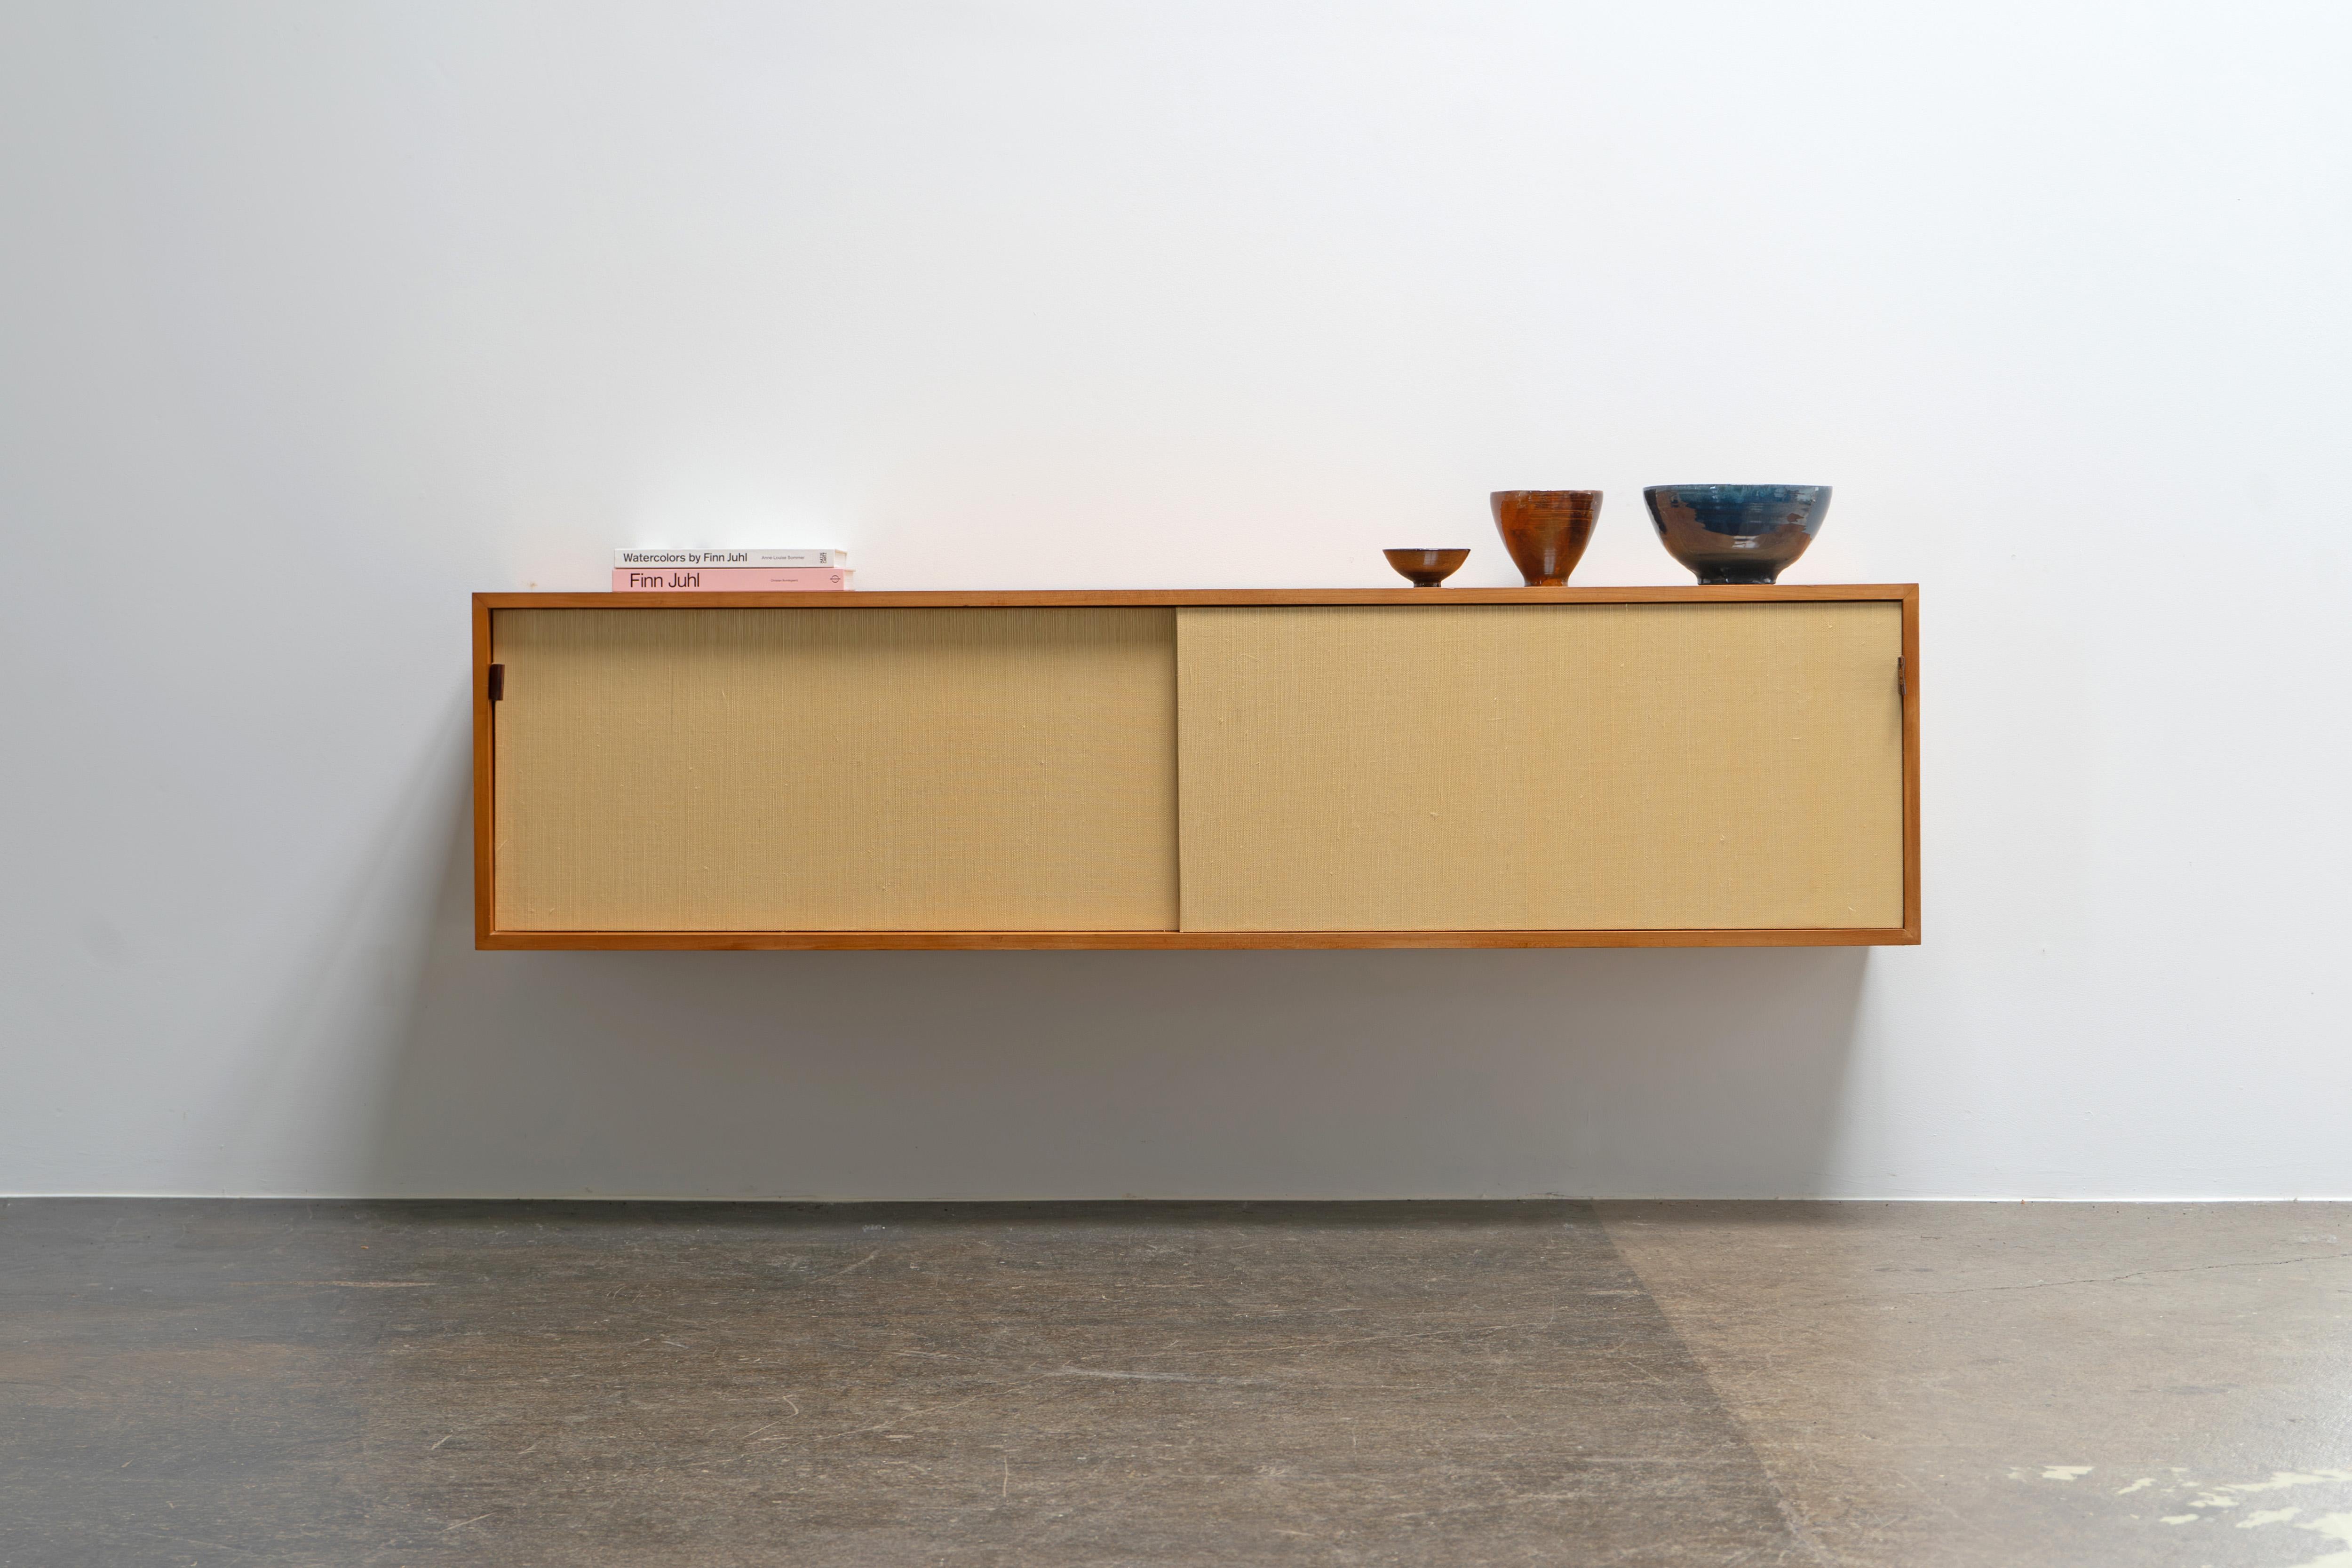 Extremely rare wall-hung sideboard (Mod°123) from 1958, designed by Florence Knoll for Knoll International - this version was produced in a small edition by Knoll in Stuttgart in 1958.

The sliding doors are covered with natural fiber, sewn leather